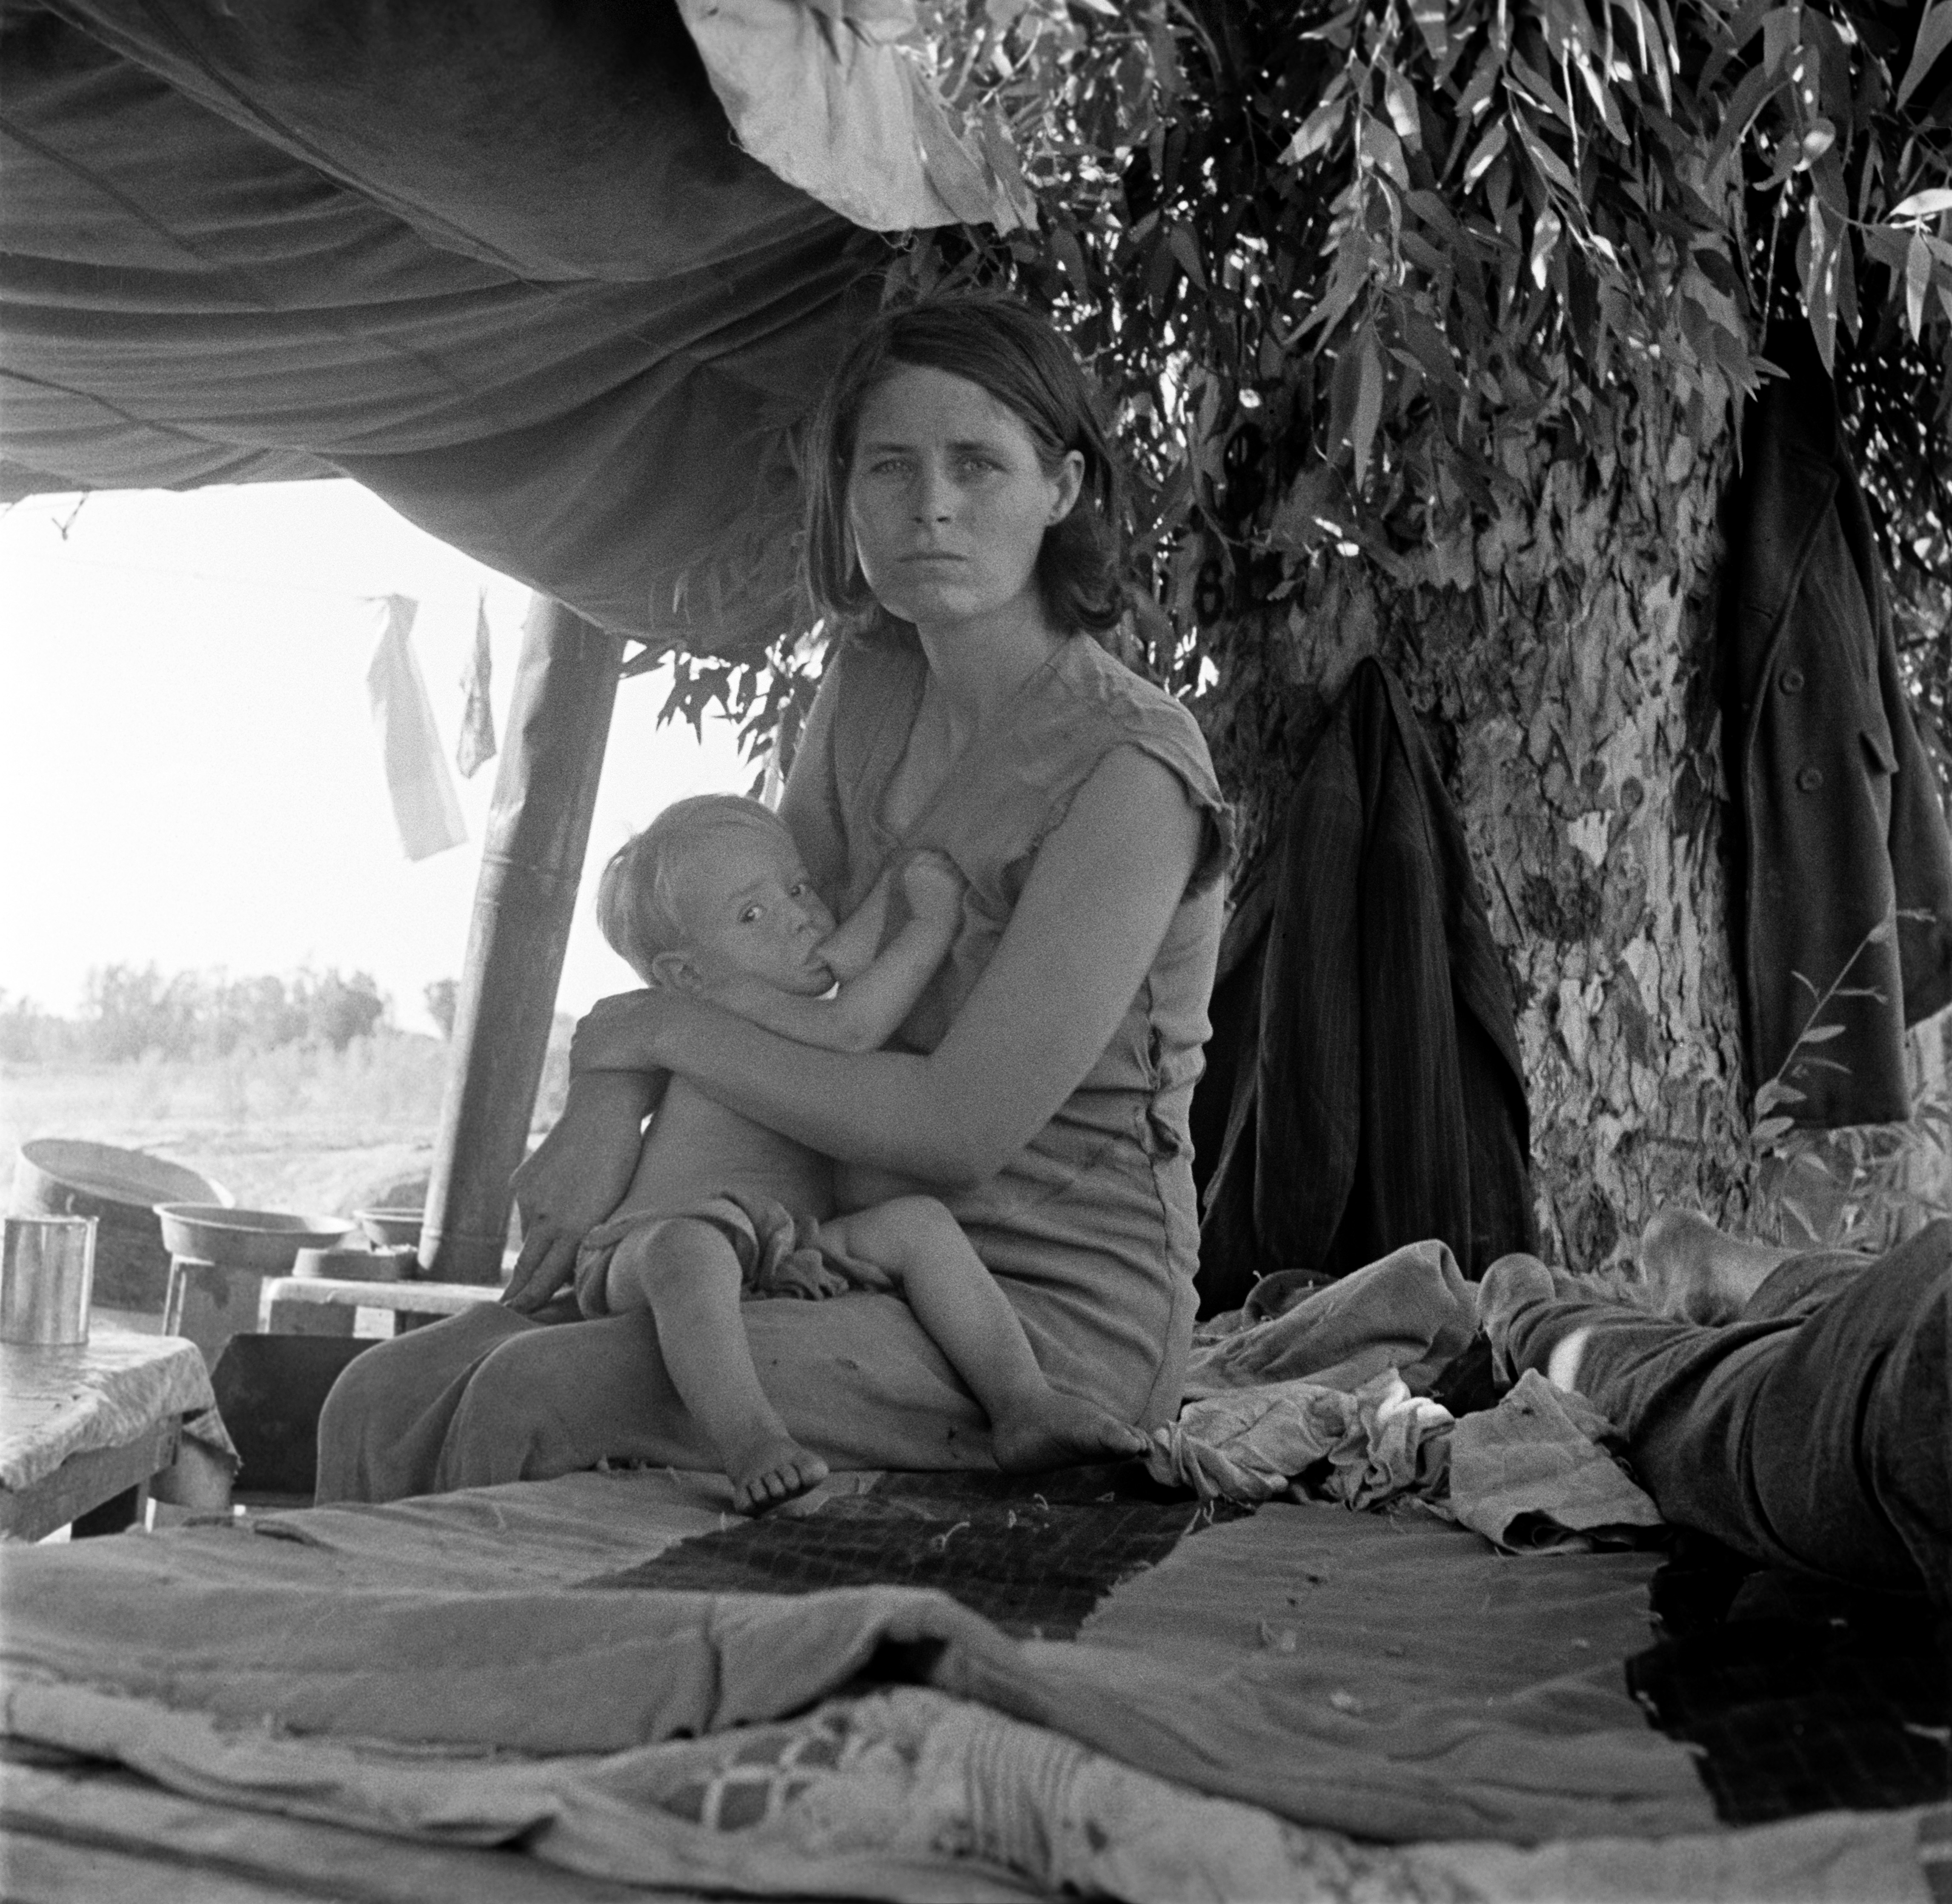 Dorothea Lange, Drought refugees from Oklahoma camping by the roadside, Blythe, California, 1936